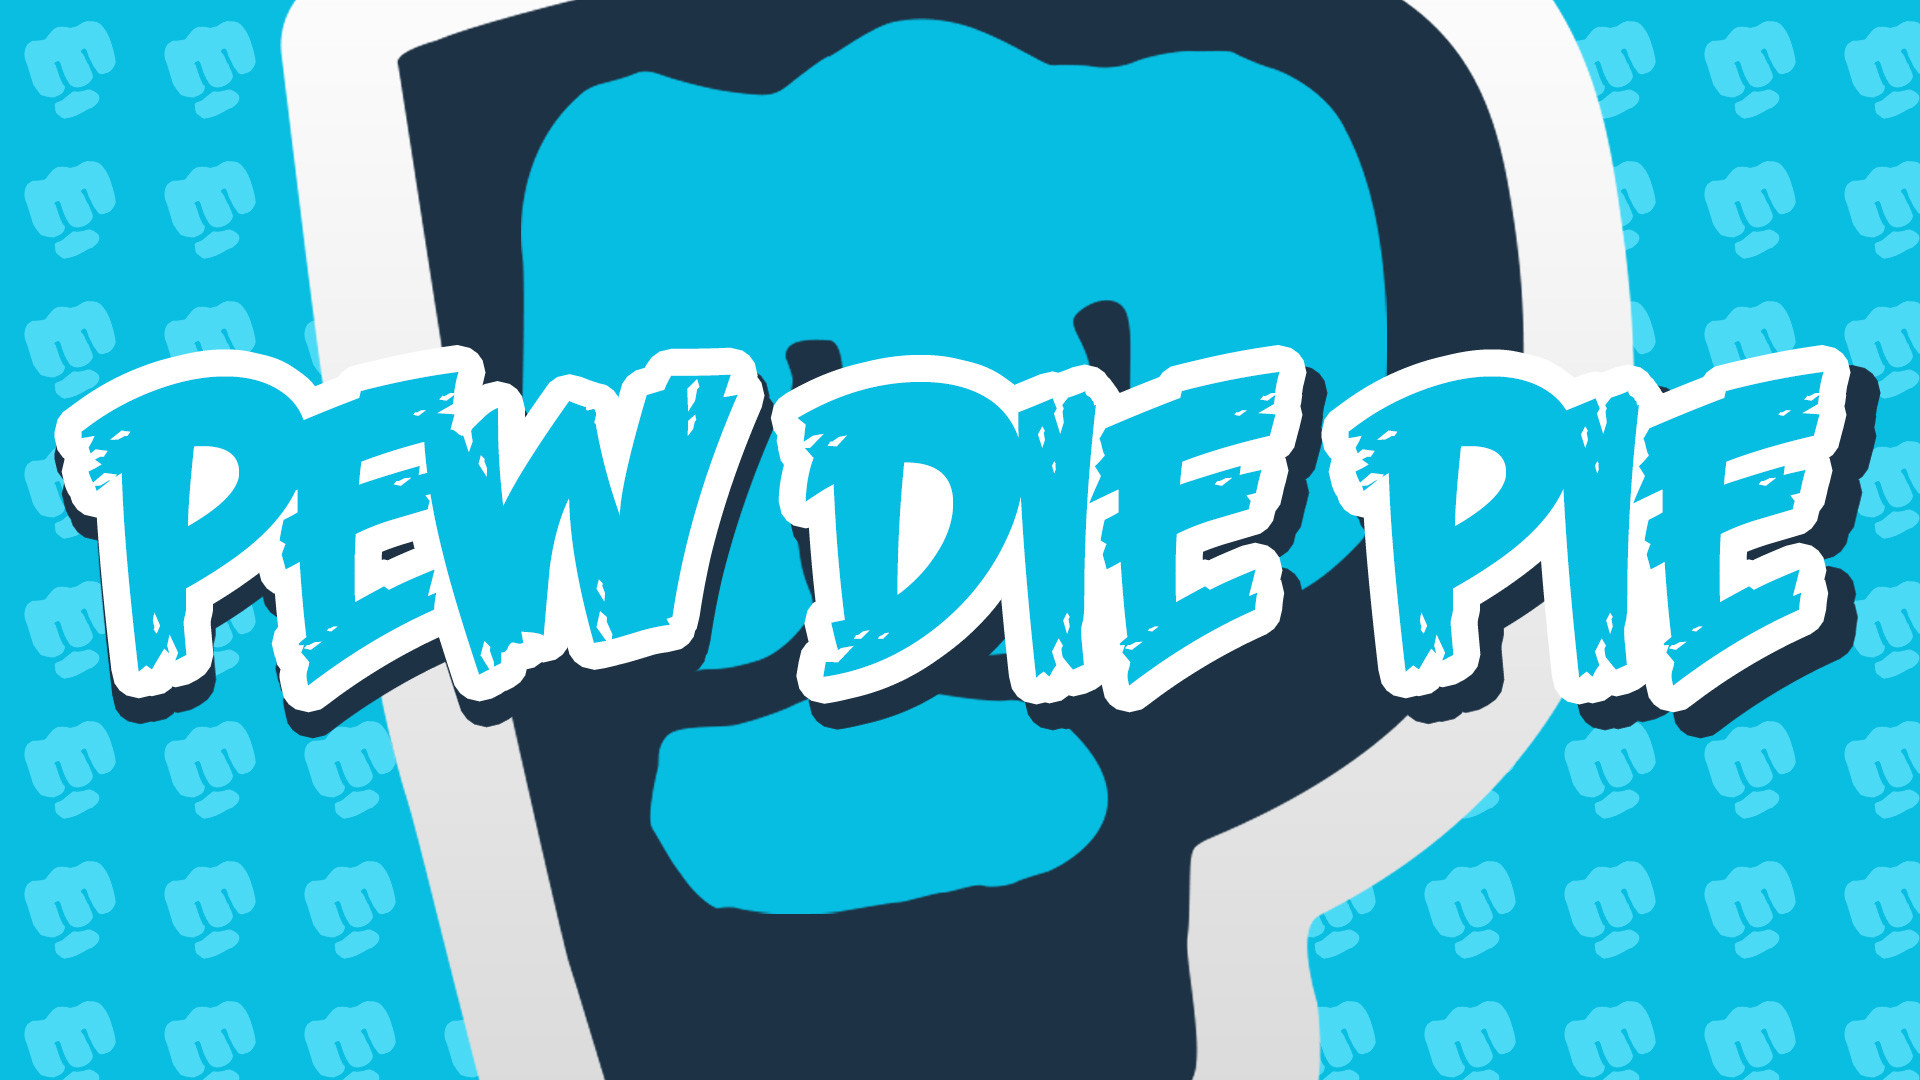 1920x1080, Pewdiepie Wallpapers 
 Data Id 
 Data Src - Sub To Pewdiepie Sign , HD Wallpaper & Backgrounds